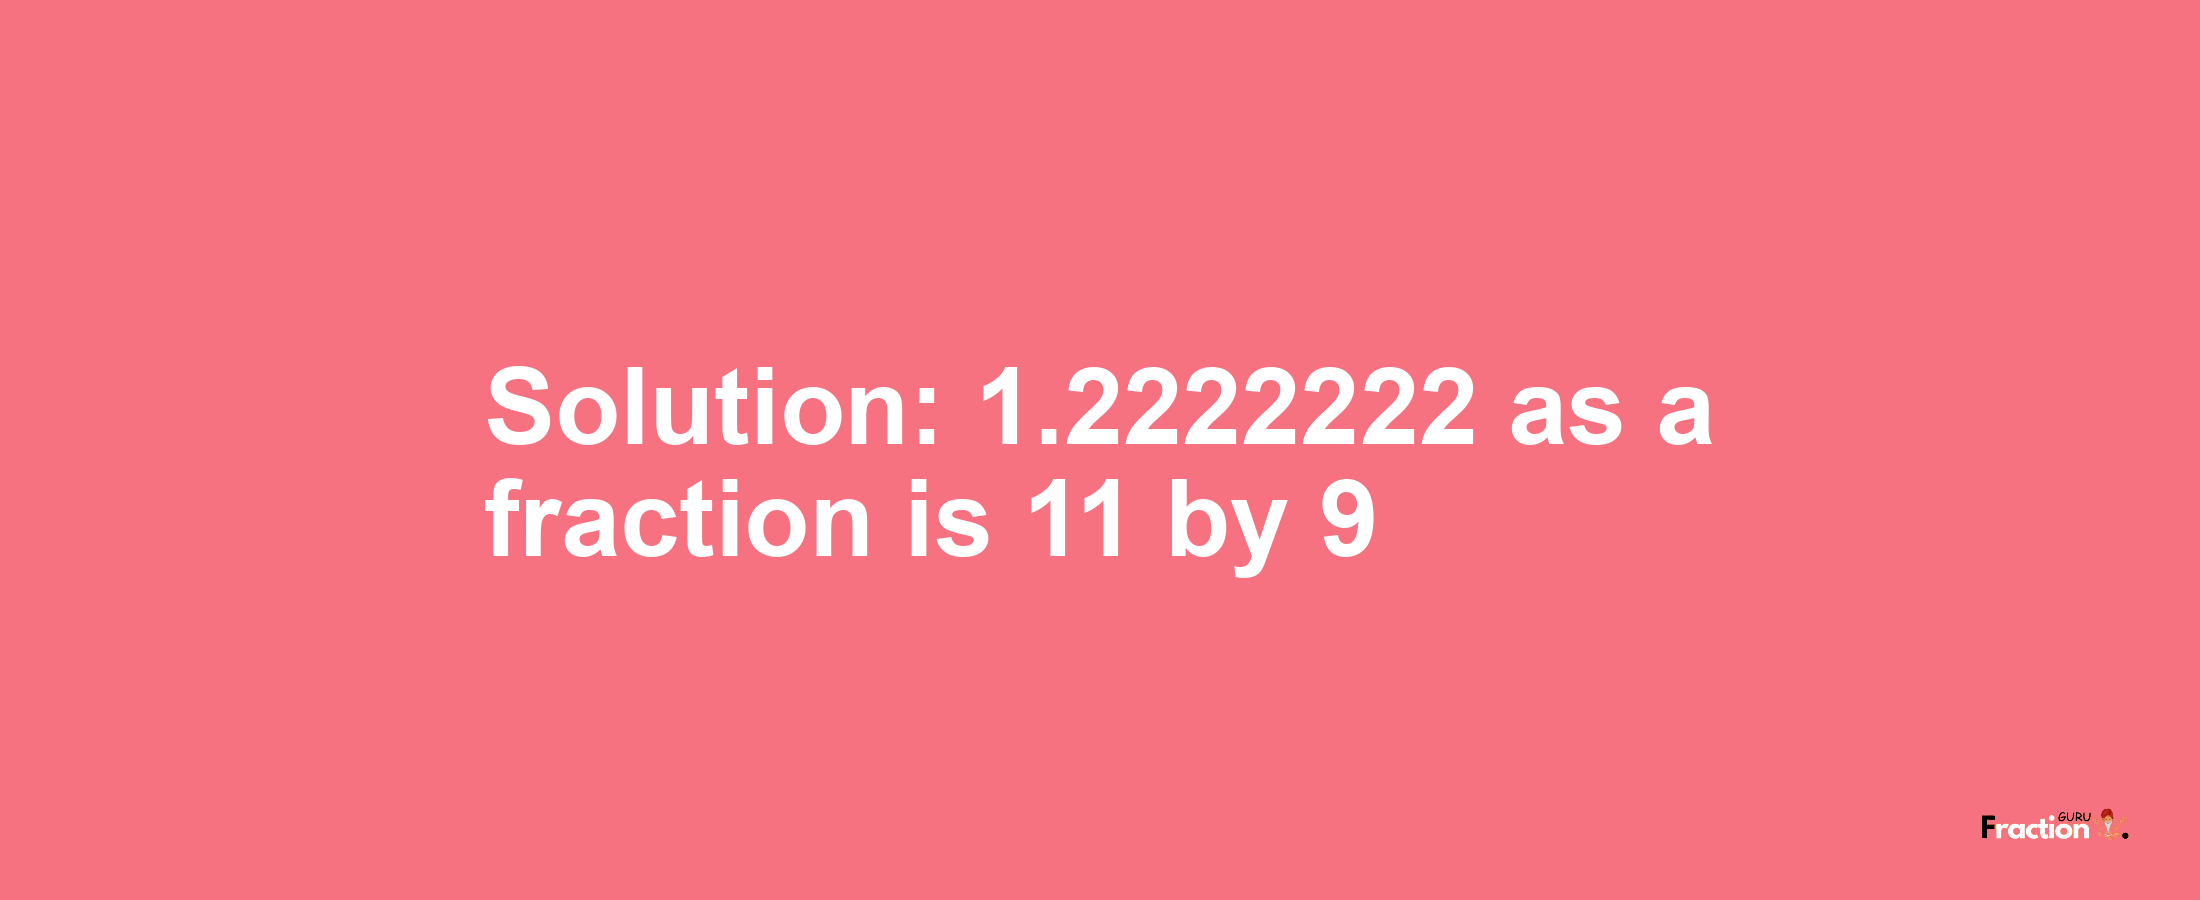 Solution:1.2222222 as a fraction is 11/9